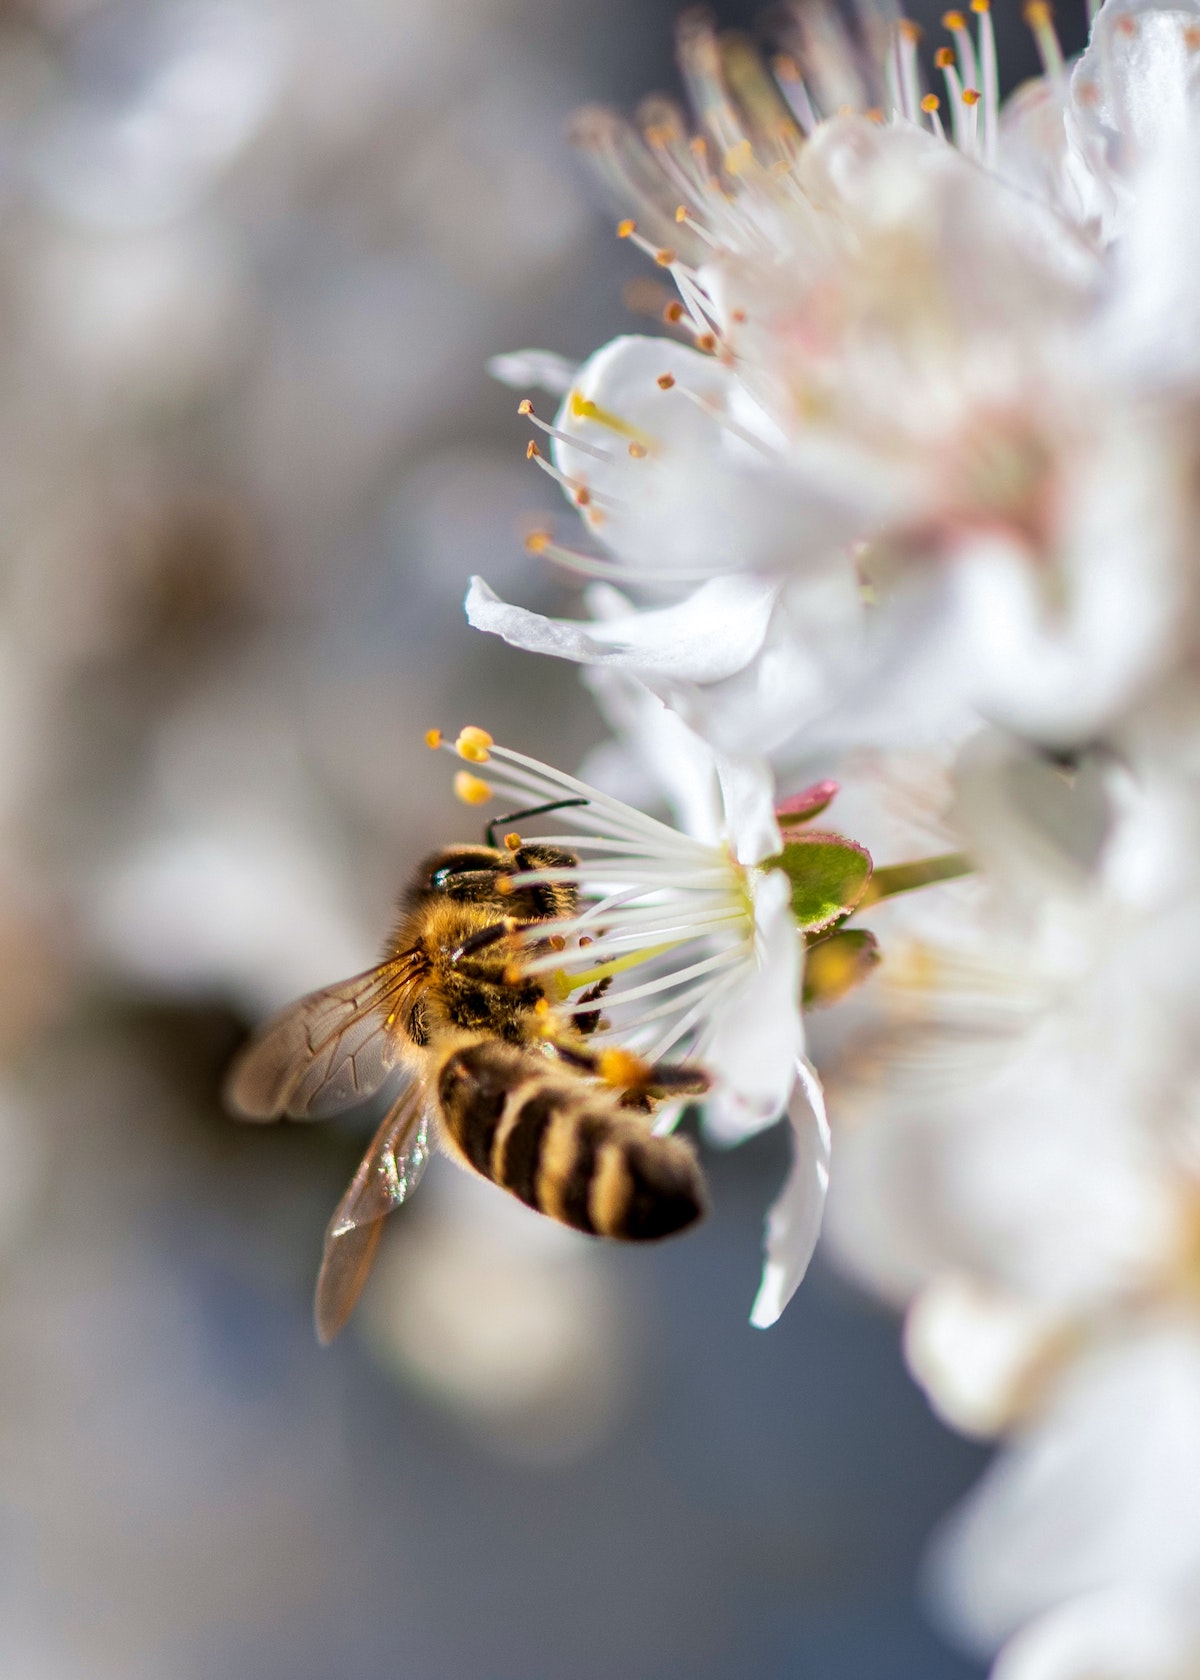 How bees conjure up honey from nectar - How bees conjure up honey from nectar